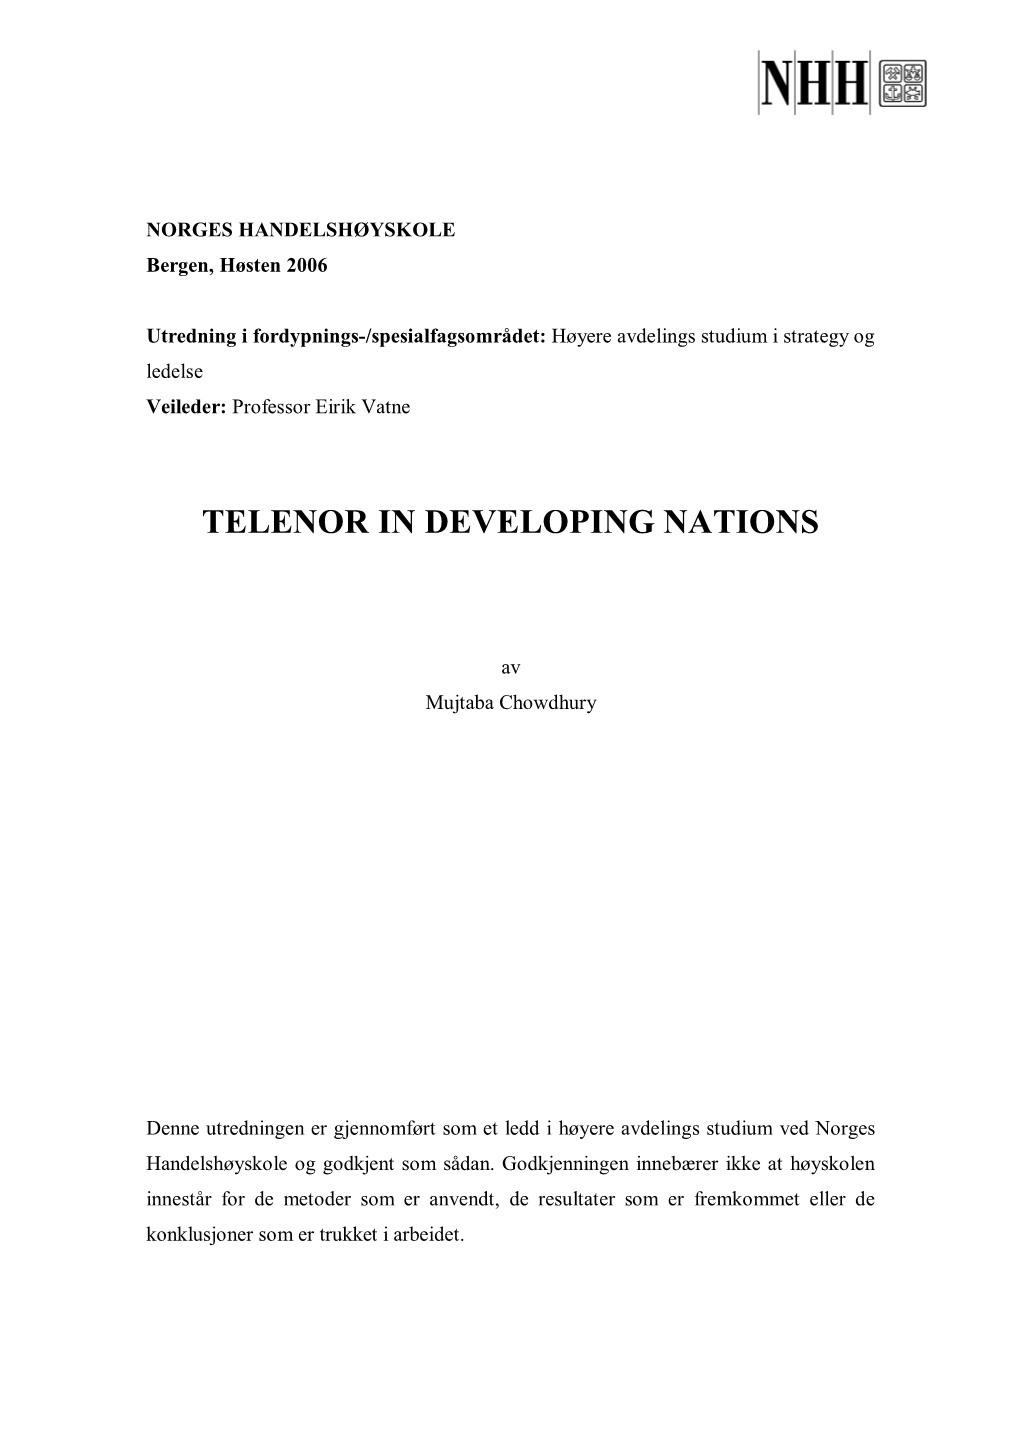 Telenor in Developing Nations